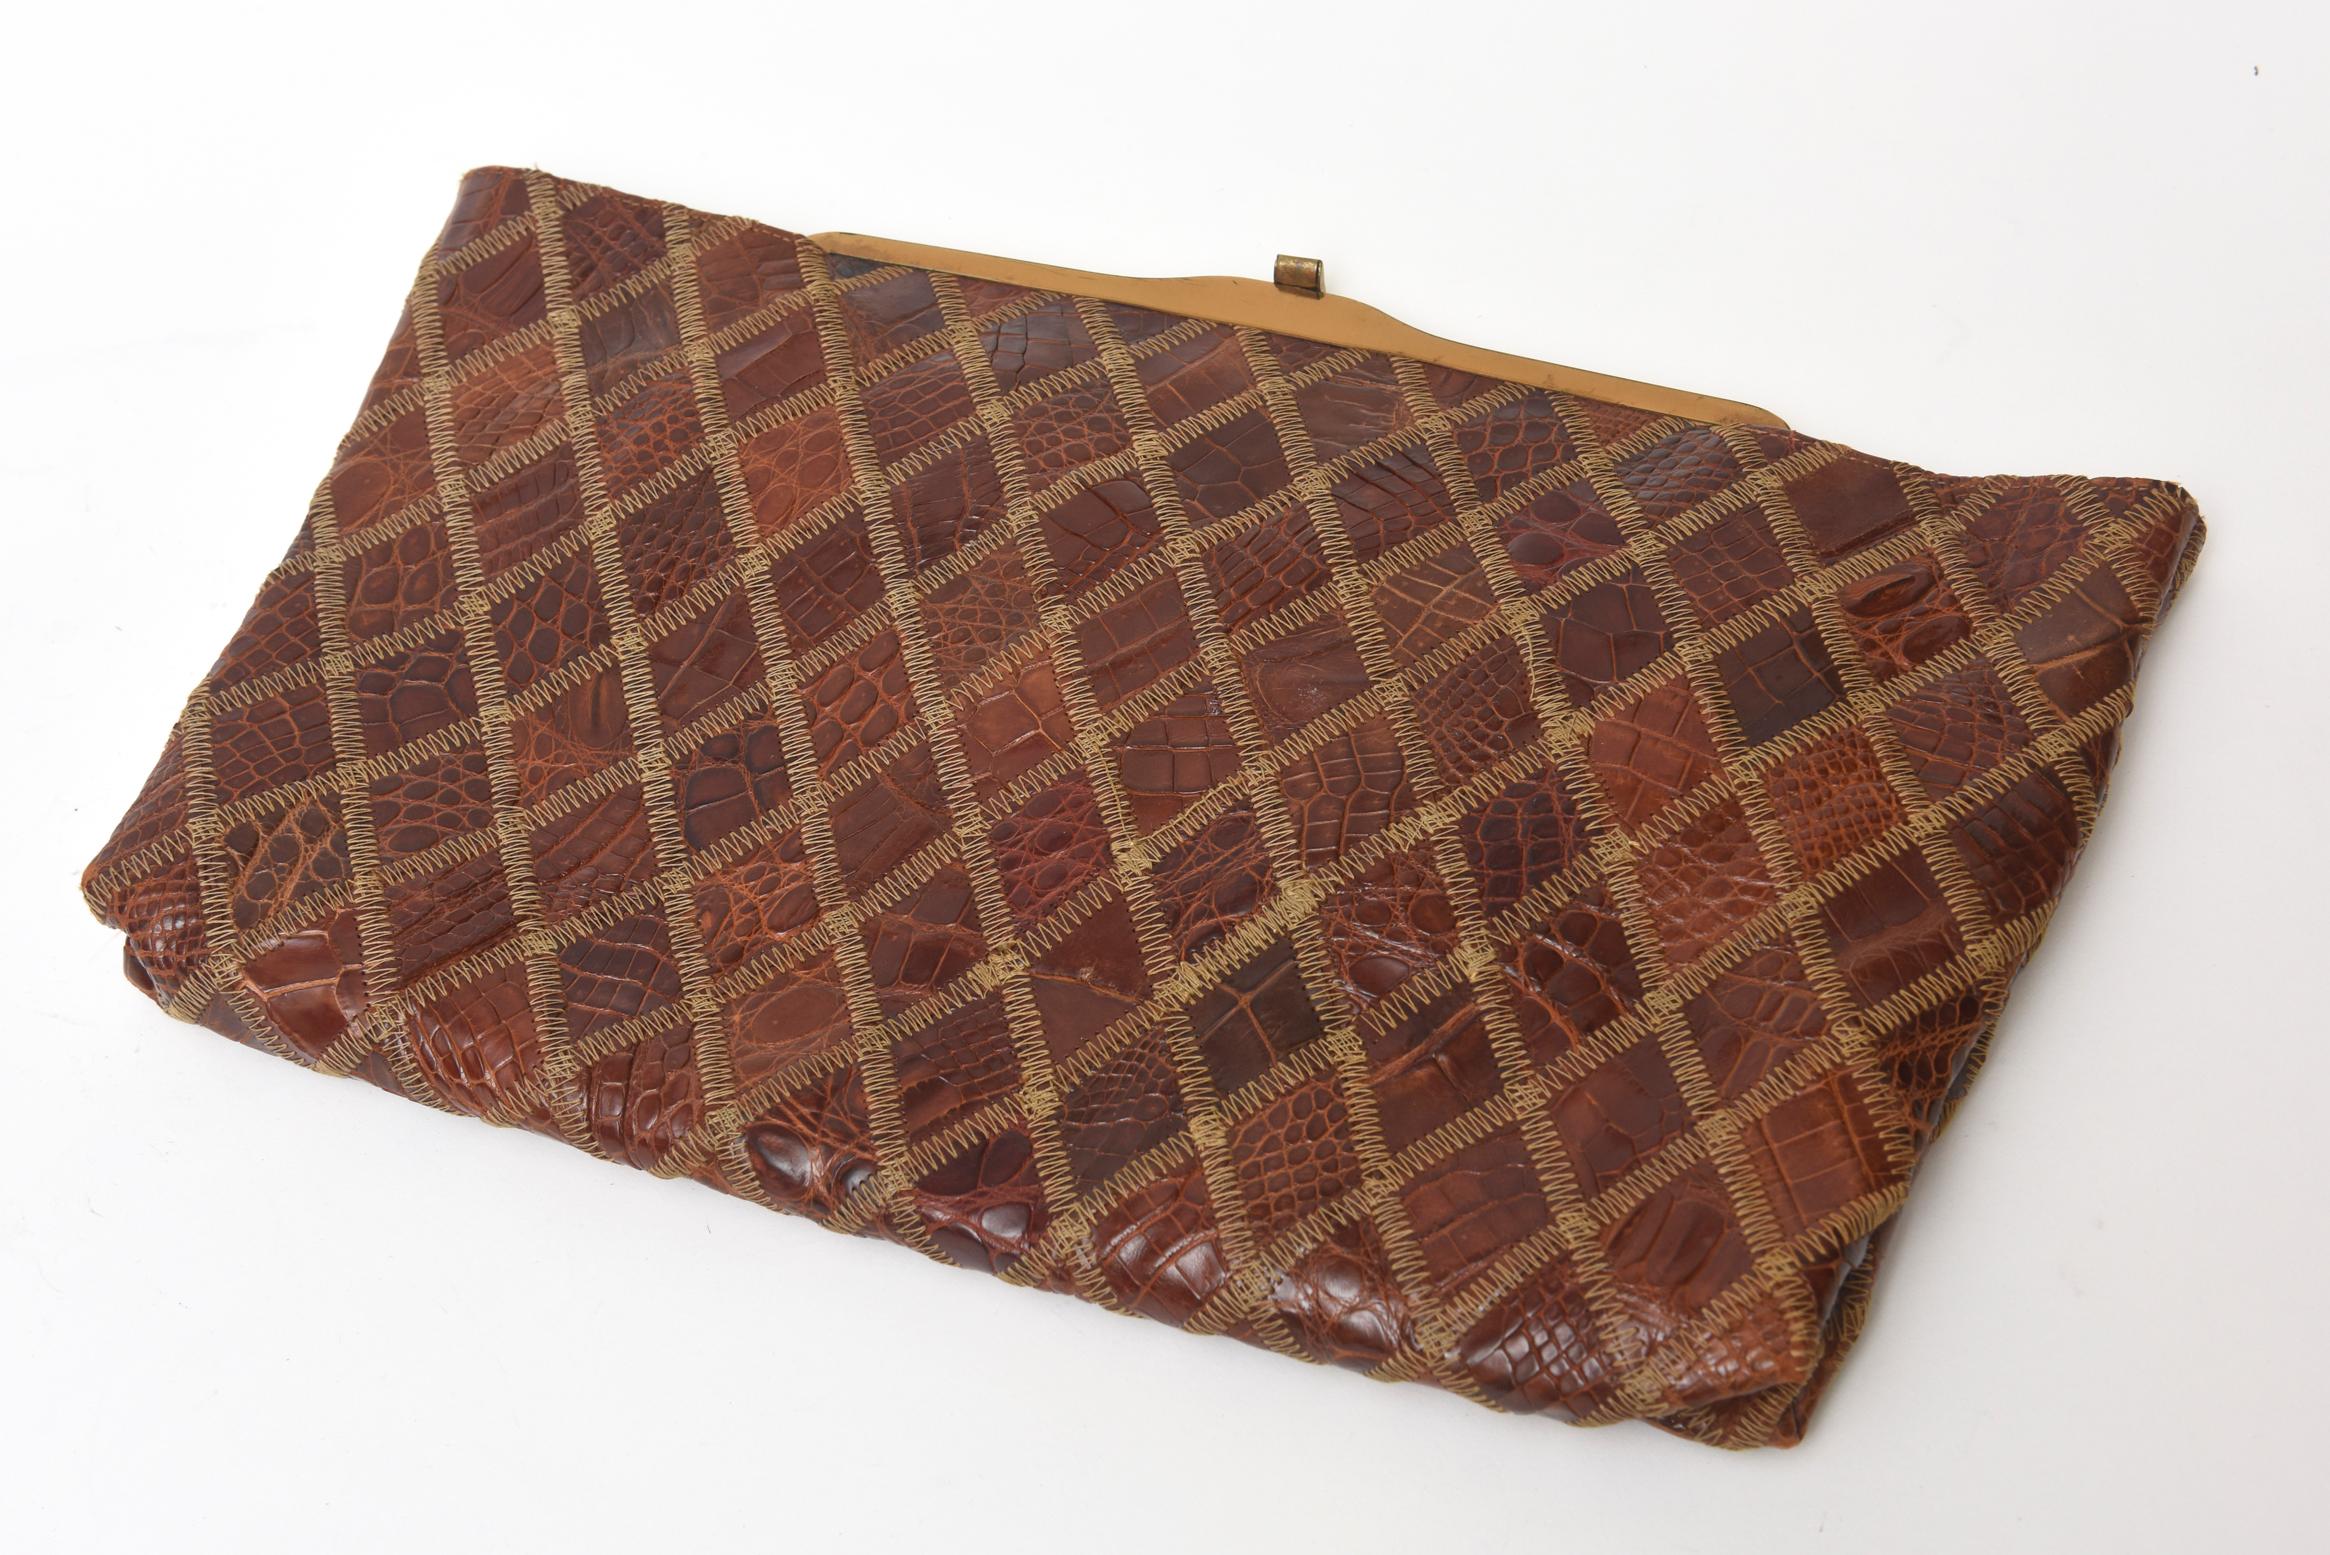 This lovely mid century modern diamond patterned alligator clutch has gold toned hardware and closure. The different tones of brown supple alligator leather make this textural with it's top stitching. It has an enclosure of a small coin purse and a